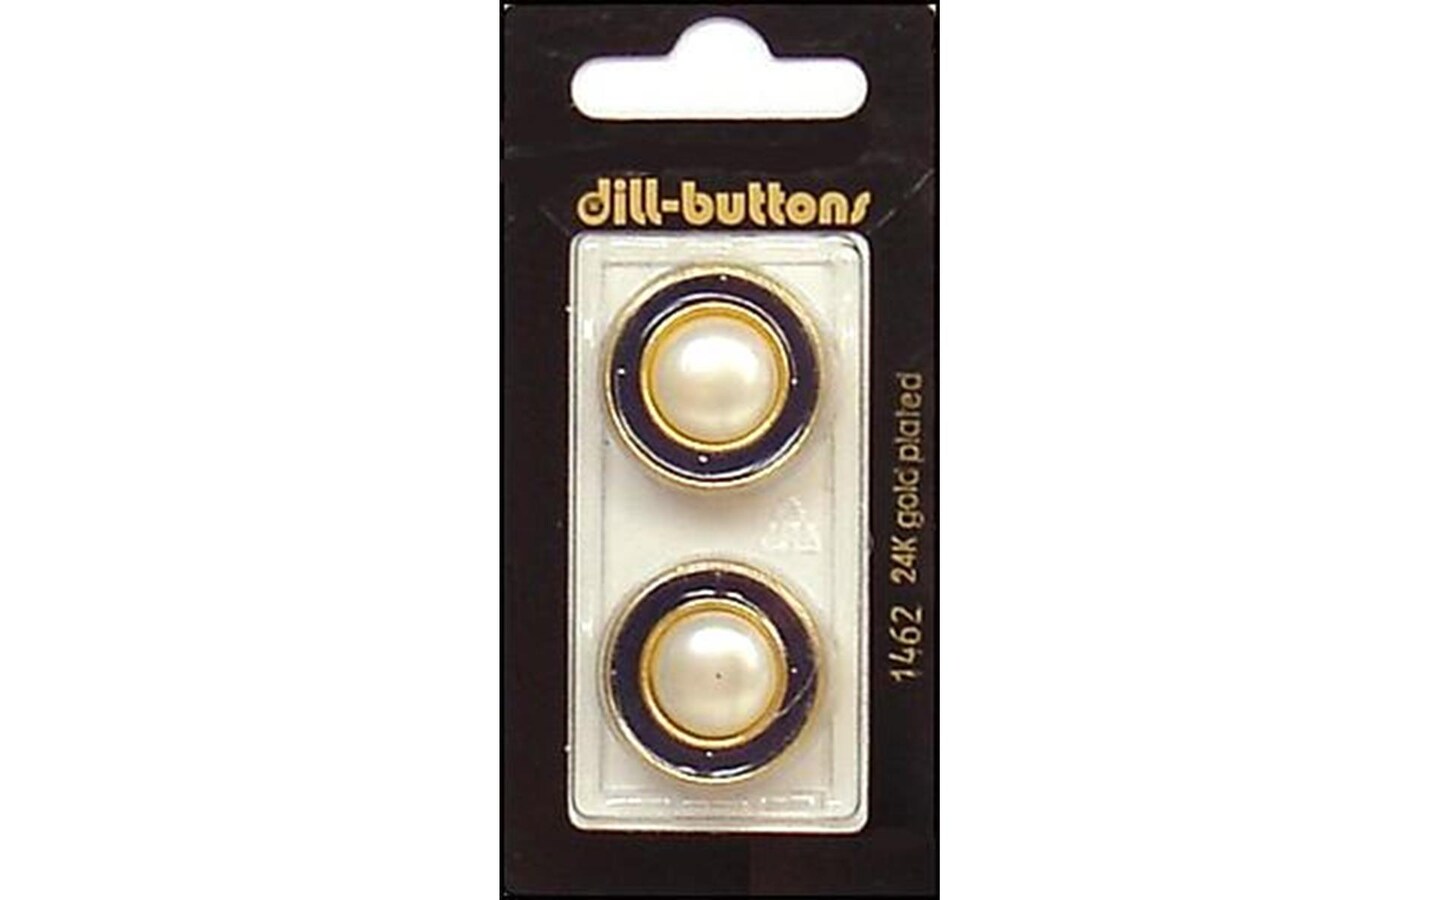 Bargain Deals On Wholesale plastic toggle buttons For DIY Crafts And Sewing  